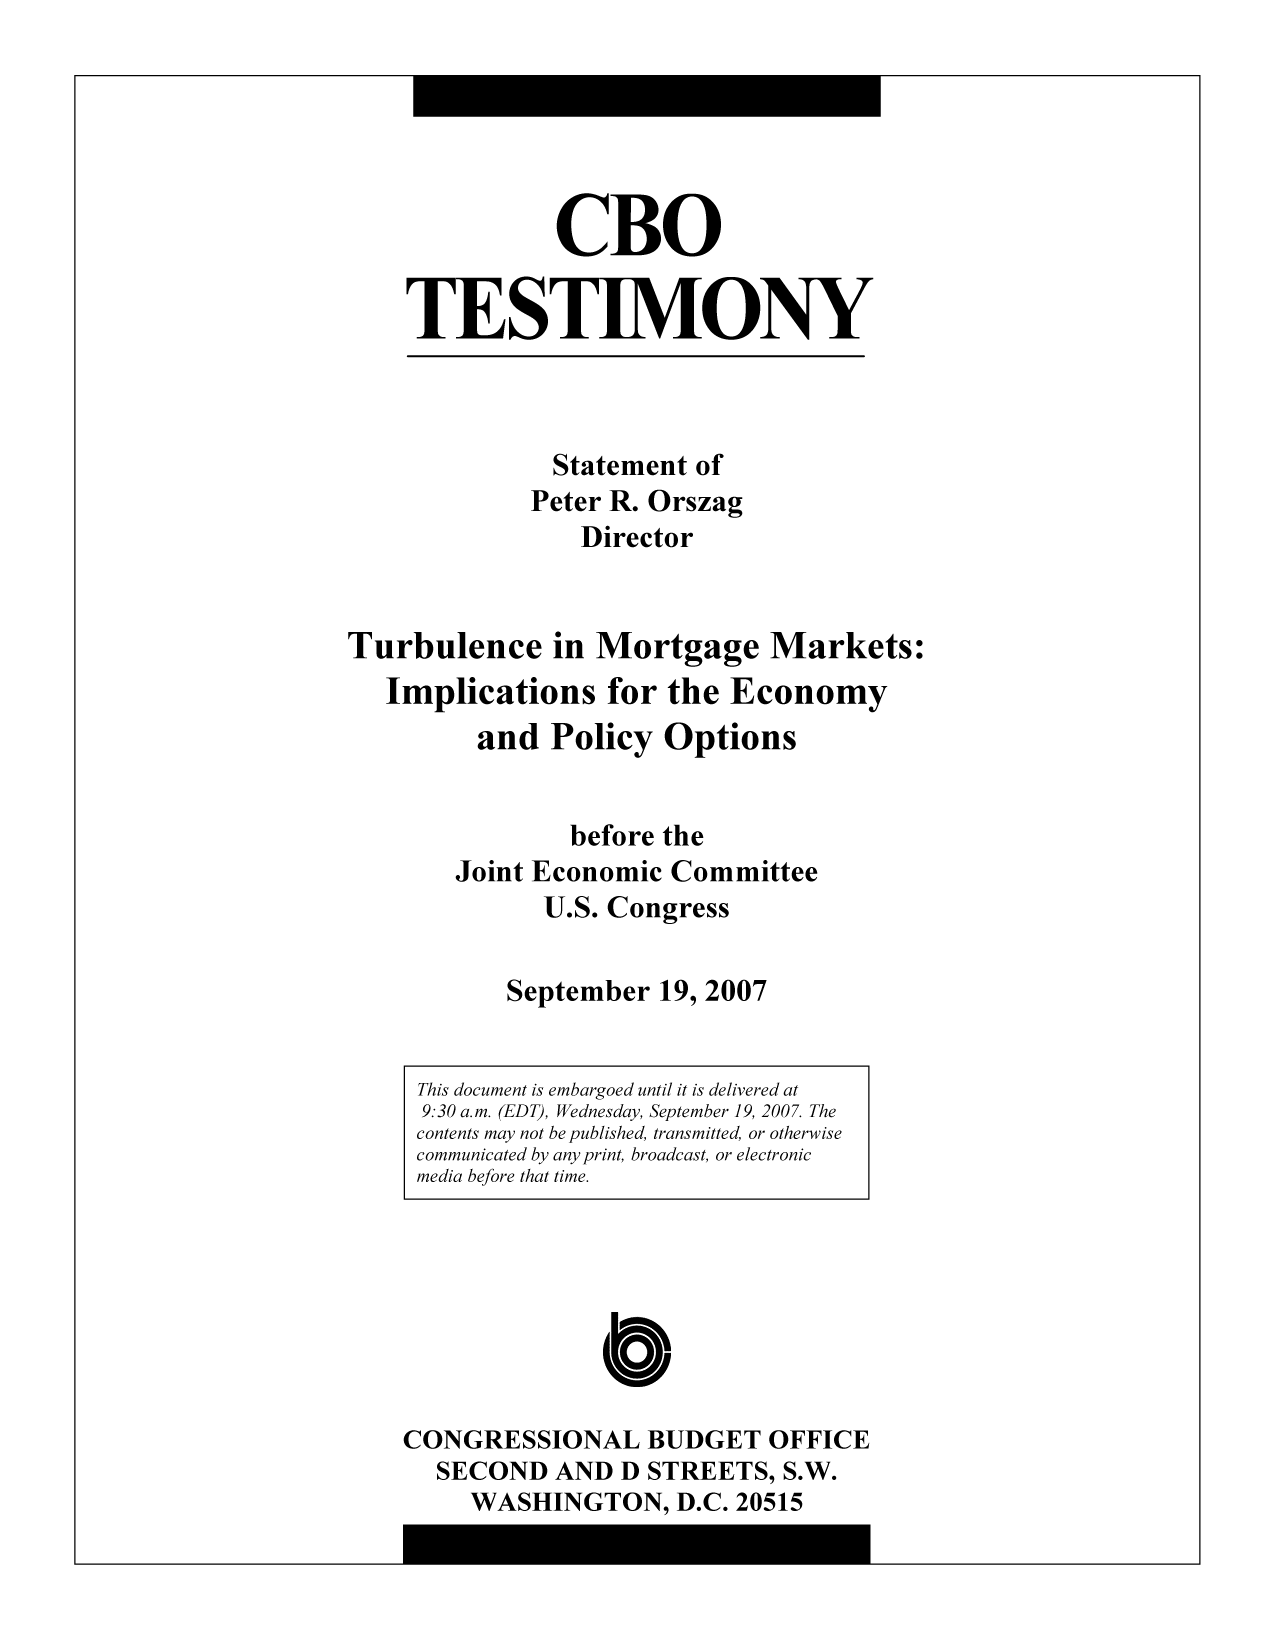 handle is hein.congrec/cbo9069 and id is 1 raw text is: CBO
TESTIMONY

Statement of
Peter R. Orszag
Director

Turbulence in Mortgage Markets:
Implications for the Economy
and Policy Options
before the
Joint Economic Committee
U.S. Congress
September 19, 2007

CONGRESSIONAL BUDGET OFFICE
SECOND AND D STREETS, S.W.
WASHINGTON, D.C. 20515

This document is embargoed until it is delivered at
9:30 a.m. (EDT), Wednesday, September 19, 2007. The
contents may not be published, transmitted, or otherwise
communicated by any print, broadcast, or electronic
media before that time.


